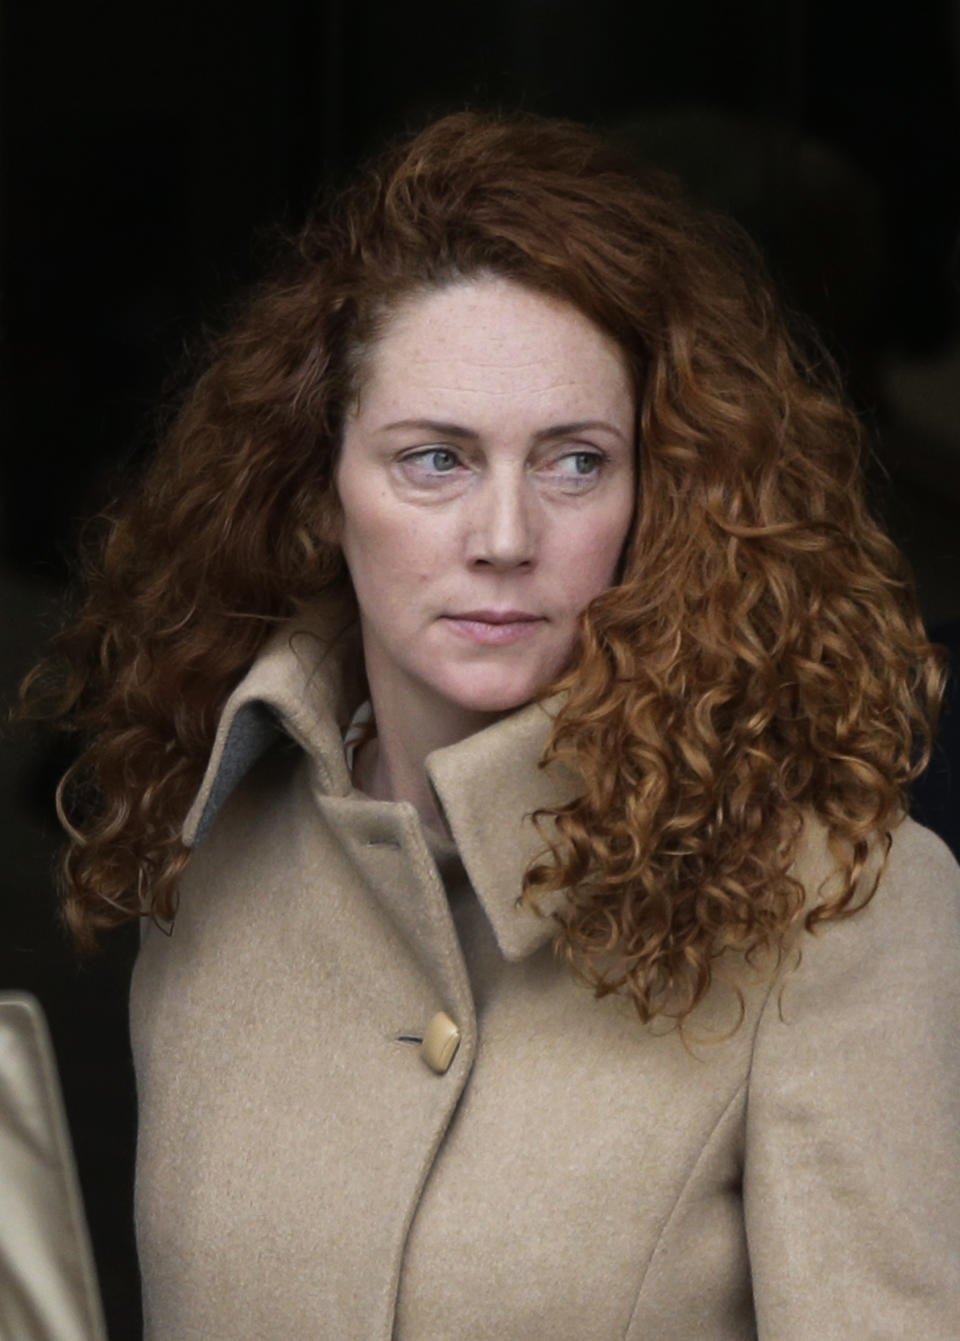 Rebekah Brooks, the former chief of News Corp.'s British operations, leaves the Old Bailey court in London London, Wednesday, Sept. 26, 2012. Rebekah Brooks and Andy Coulson, the ex-communications chief for Prime Minister David Cameron, learned Wednesday that they will face trial next September over allegations linked to phone hacking. (AP Photo/Lefteris Pitarakis)